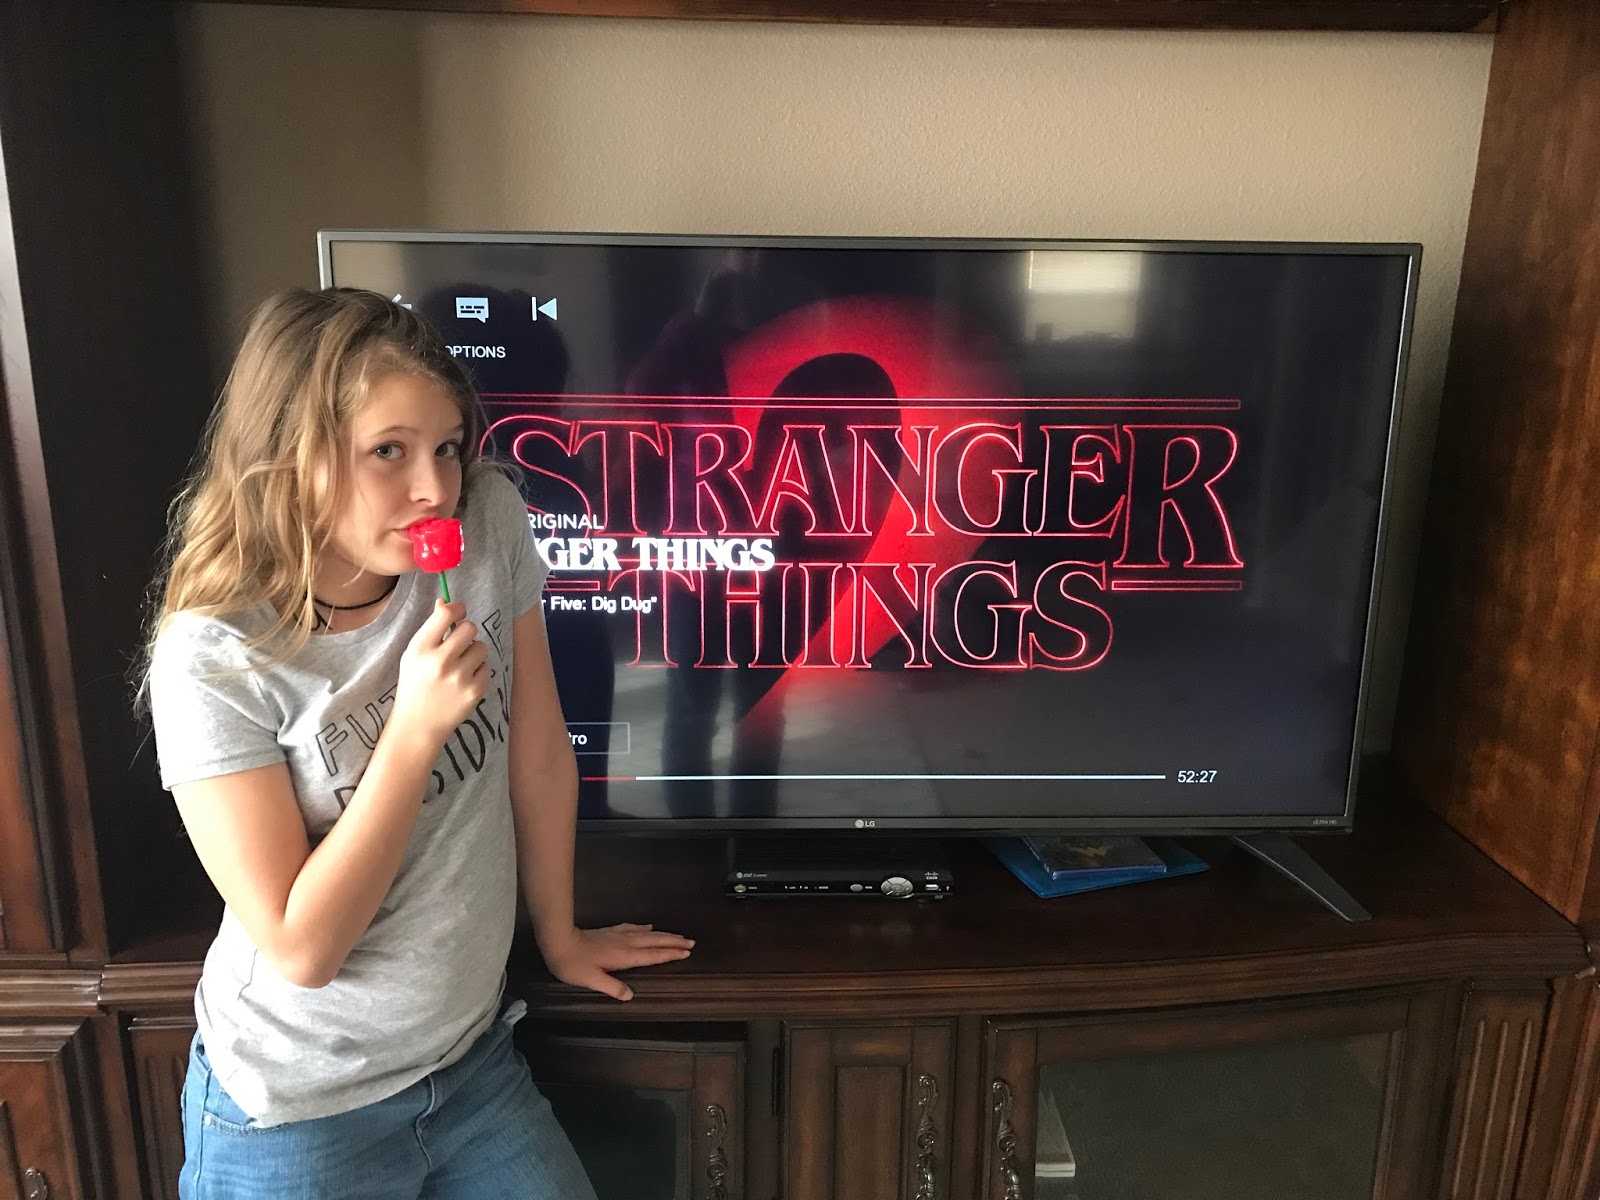 Can a 9 year old watch Stranger things?